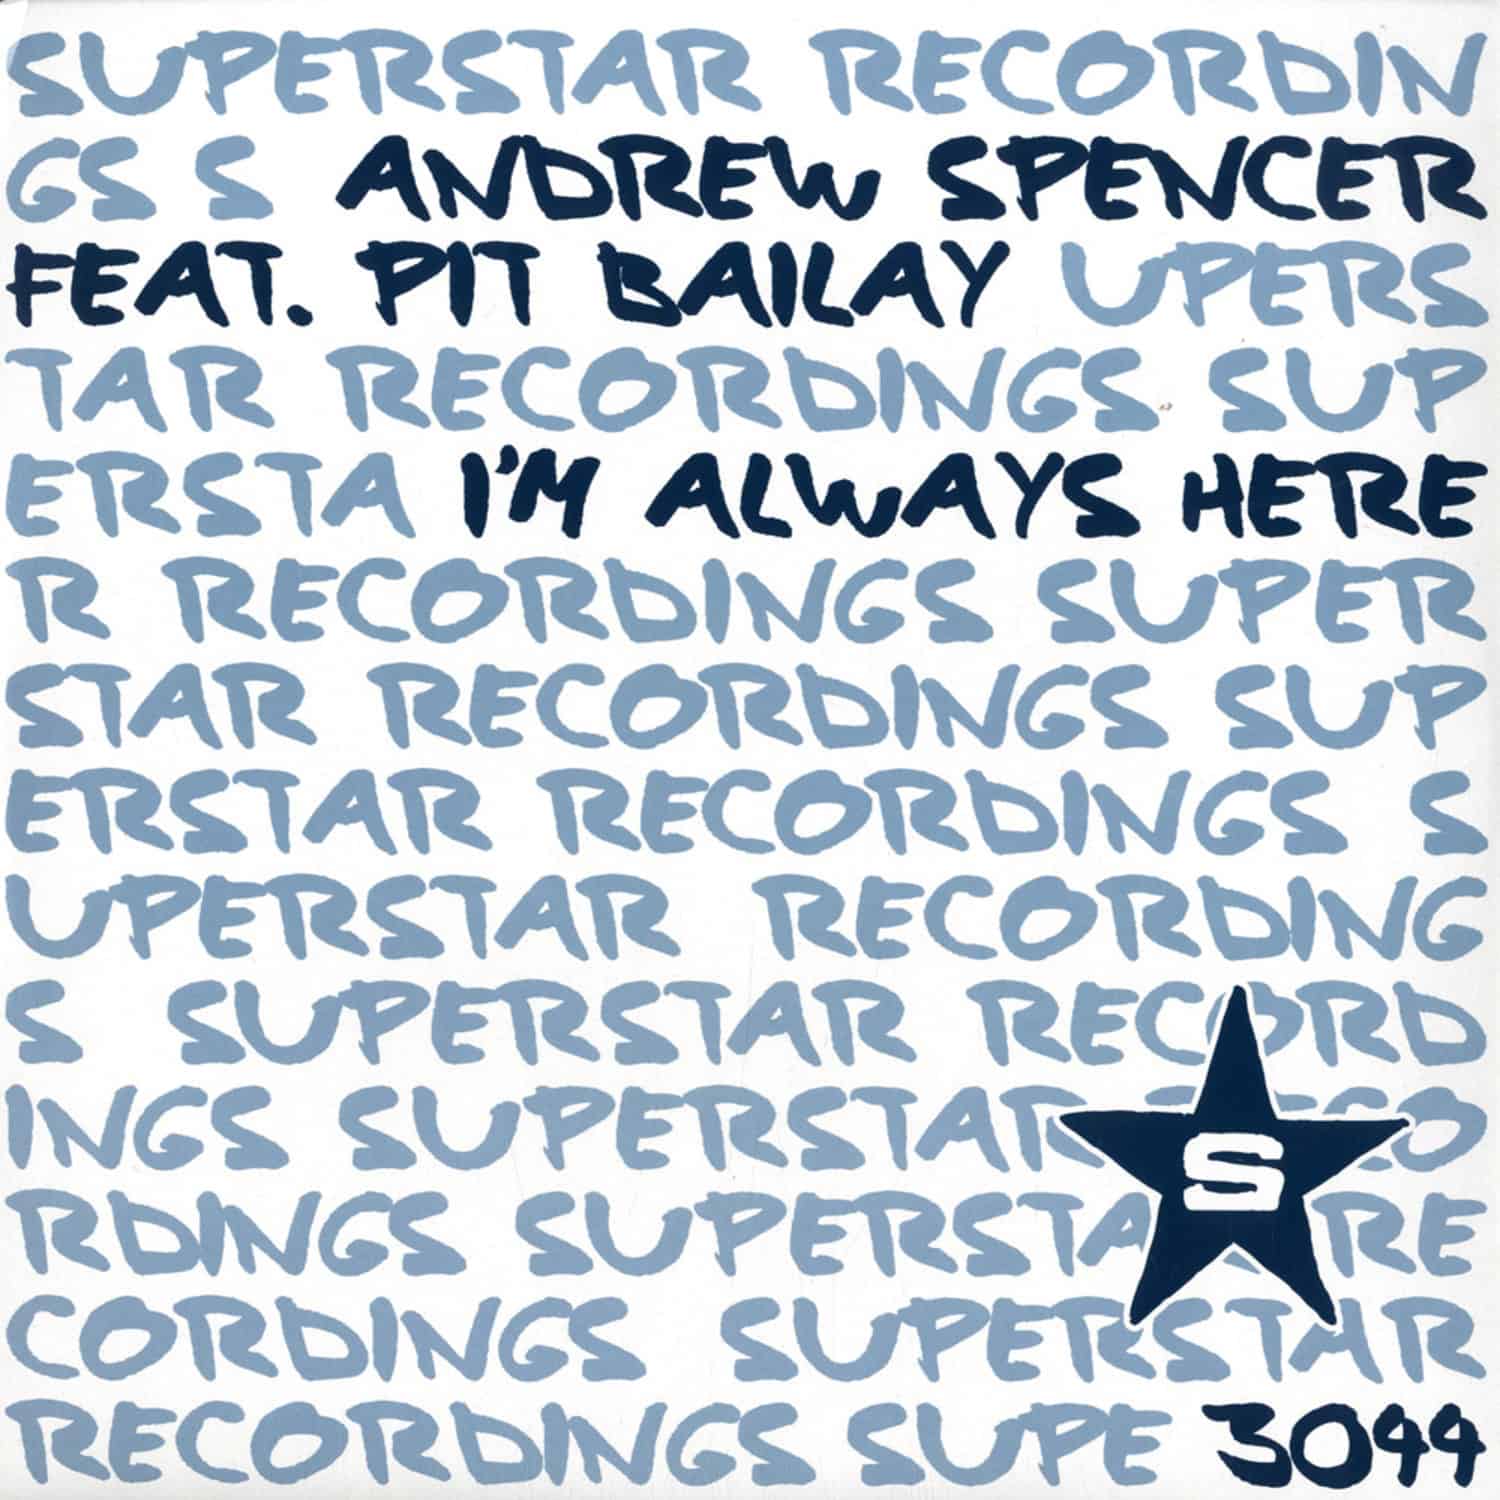 Andrew Spencer feat Pit Bailey - IM ALWAYS HERE